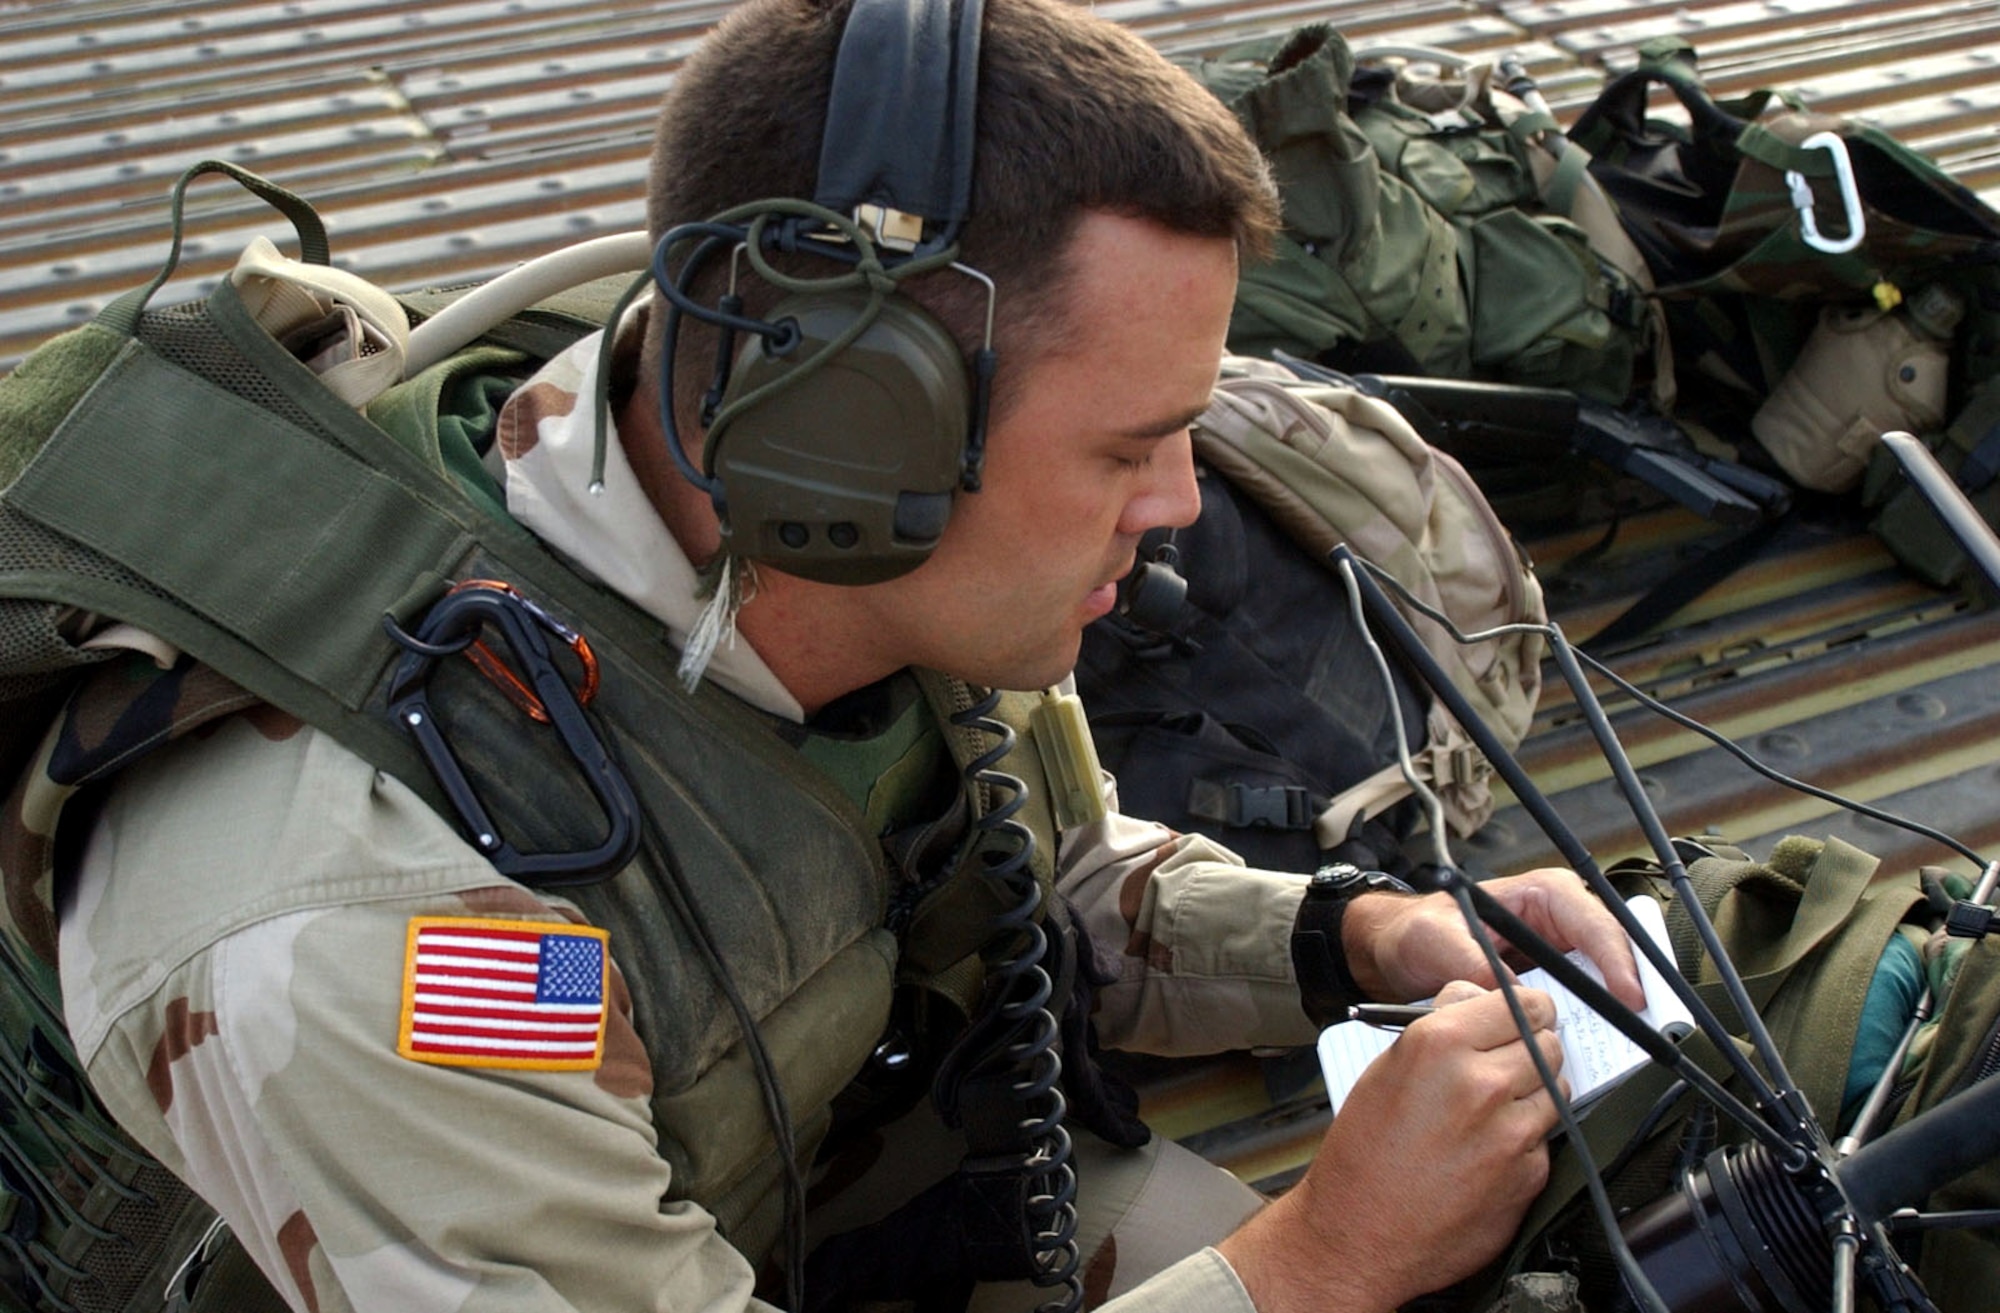 OPERATION ENDURING FREEDOM -- Capt. Danny Stout, an air liaison officer deployed with the Army's 2-505 Parachute Infantry Regiment of the 82nd Airborne Division, tests his radio before taking part in an air assault into a hostile area in the mountains of Afghanistan.  Stout, a B-52 Stratofortress pilot, is serving a two-year tour with the Army, calling in close-air support missions against enemy troops. (U.S. Air Force photo by 2nd Lt. Rebecca Garland)